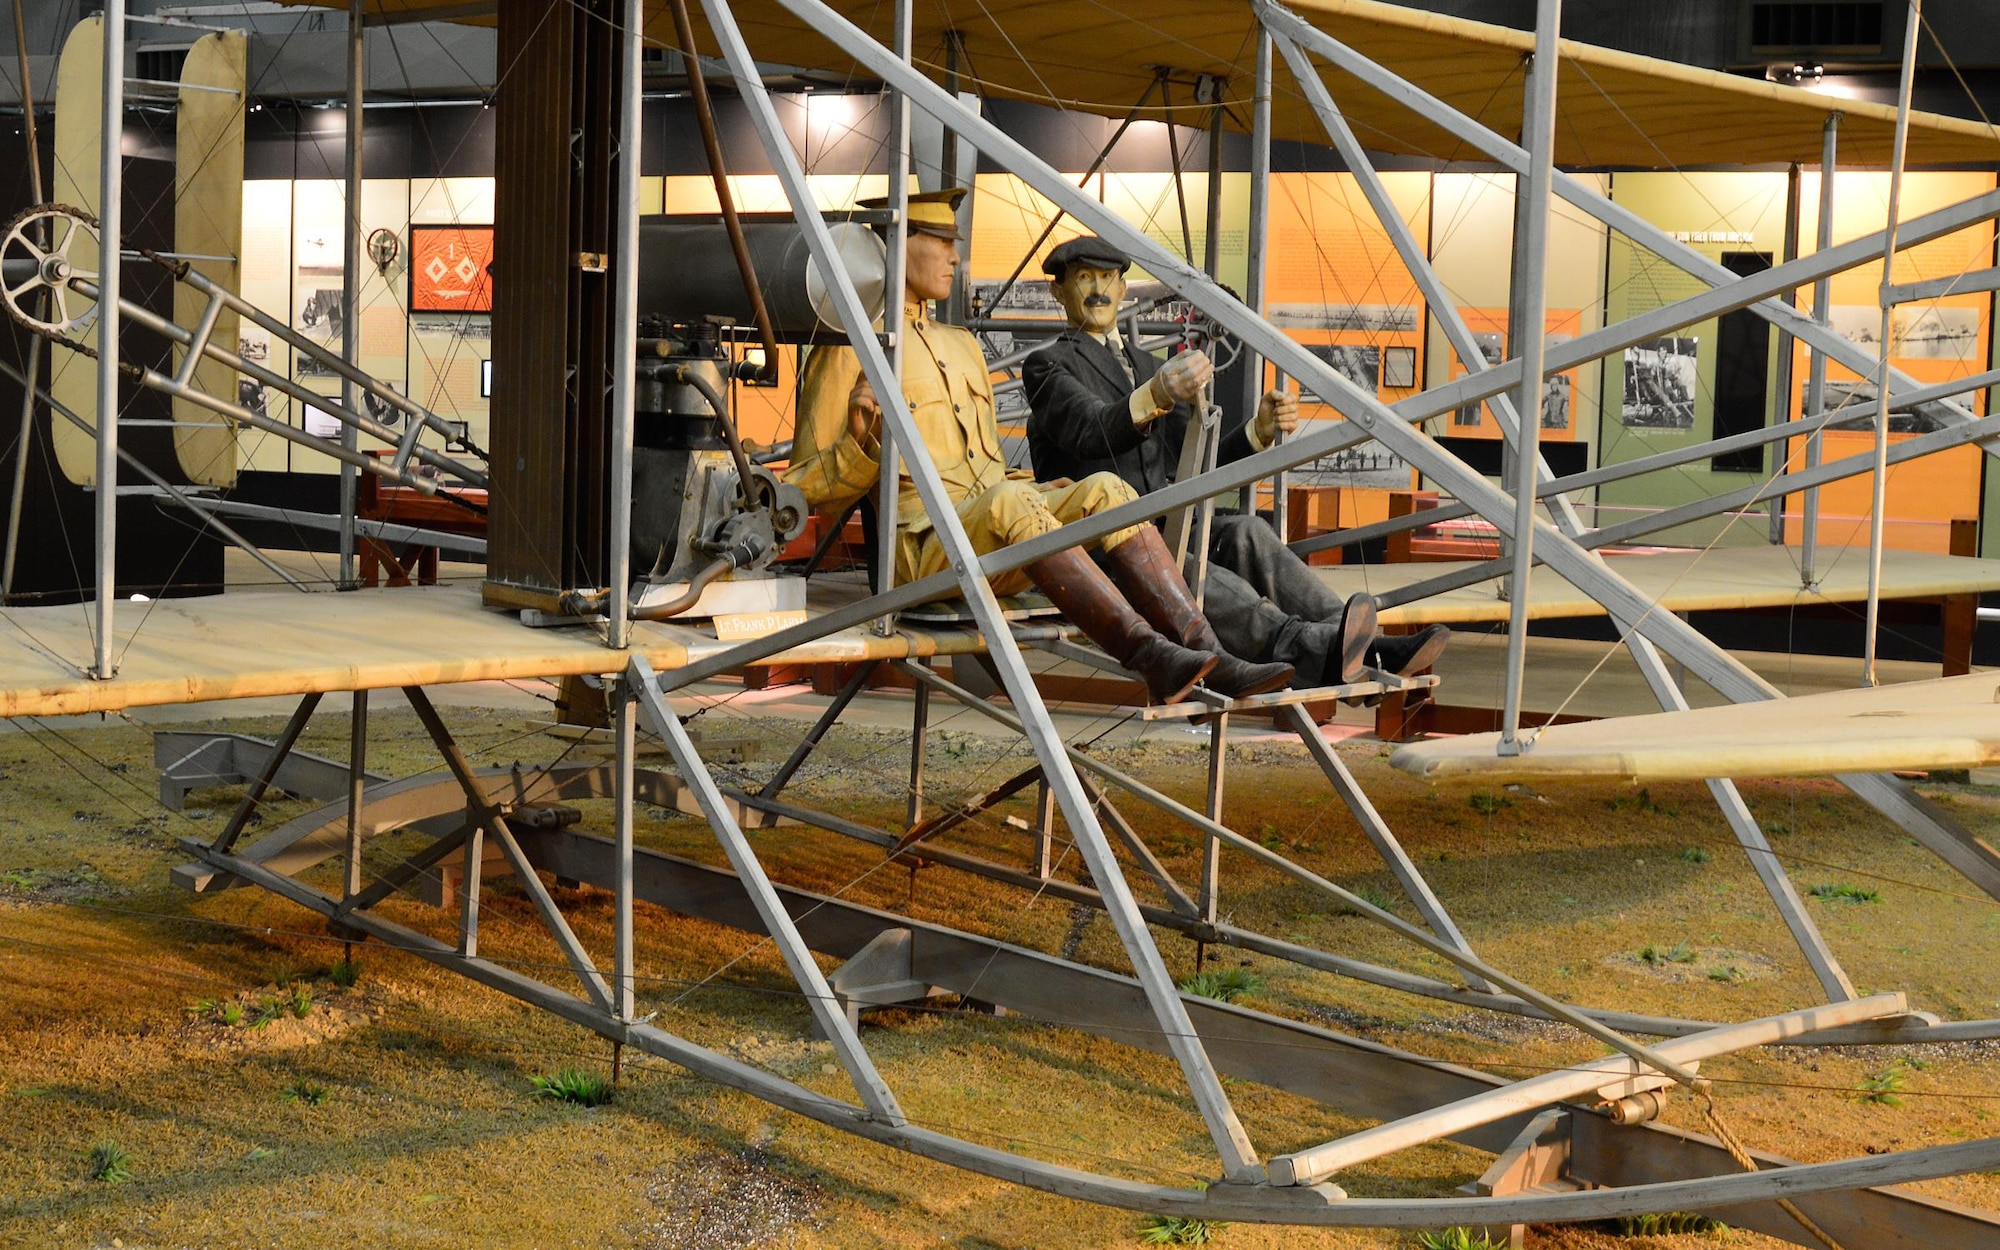 Wright 1909 Military Flyer in the Early Years Gallery at the National Museum of the United States Air Force. (U.S. Air Force photo by Ken LaRock)